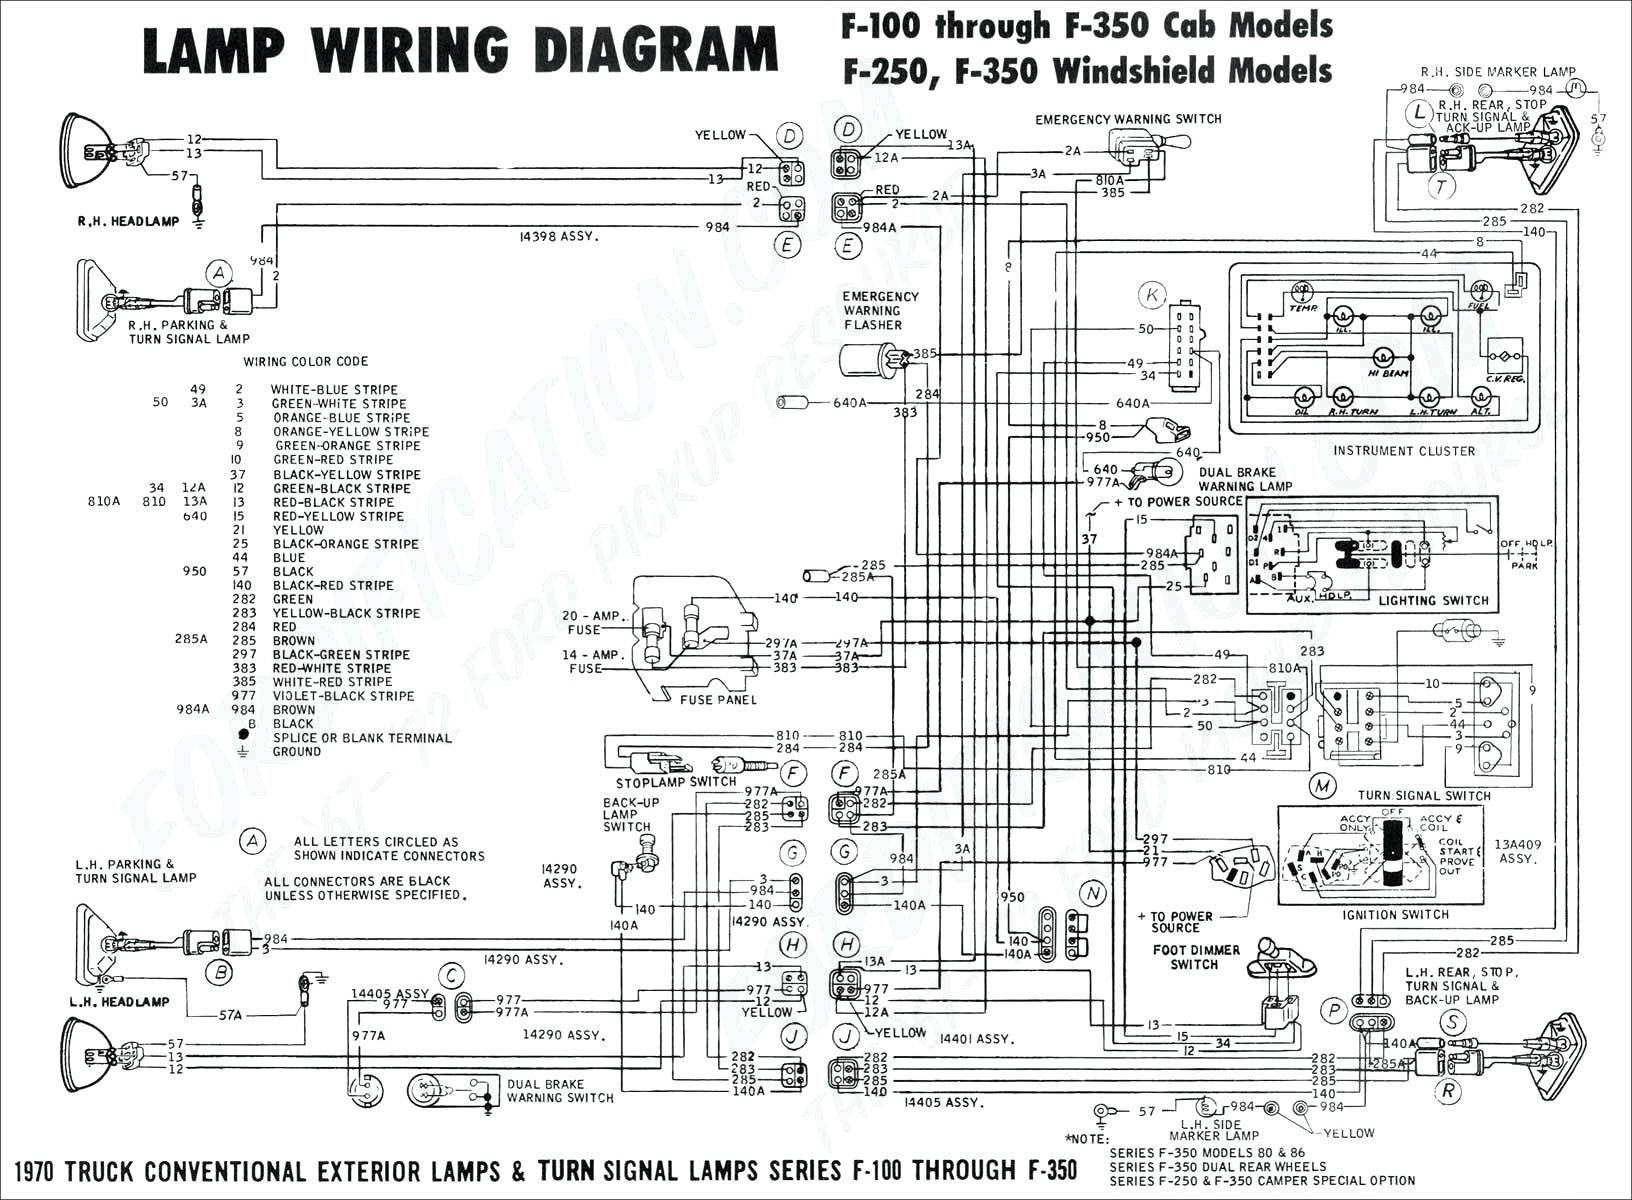 Wiring Diagram for Domestic Building New Wiring Diagram for Phase Failure Relay Refrence Ipphil Diagram